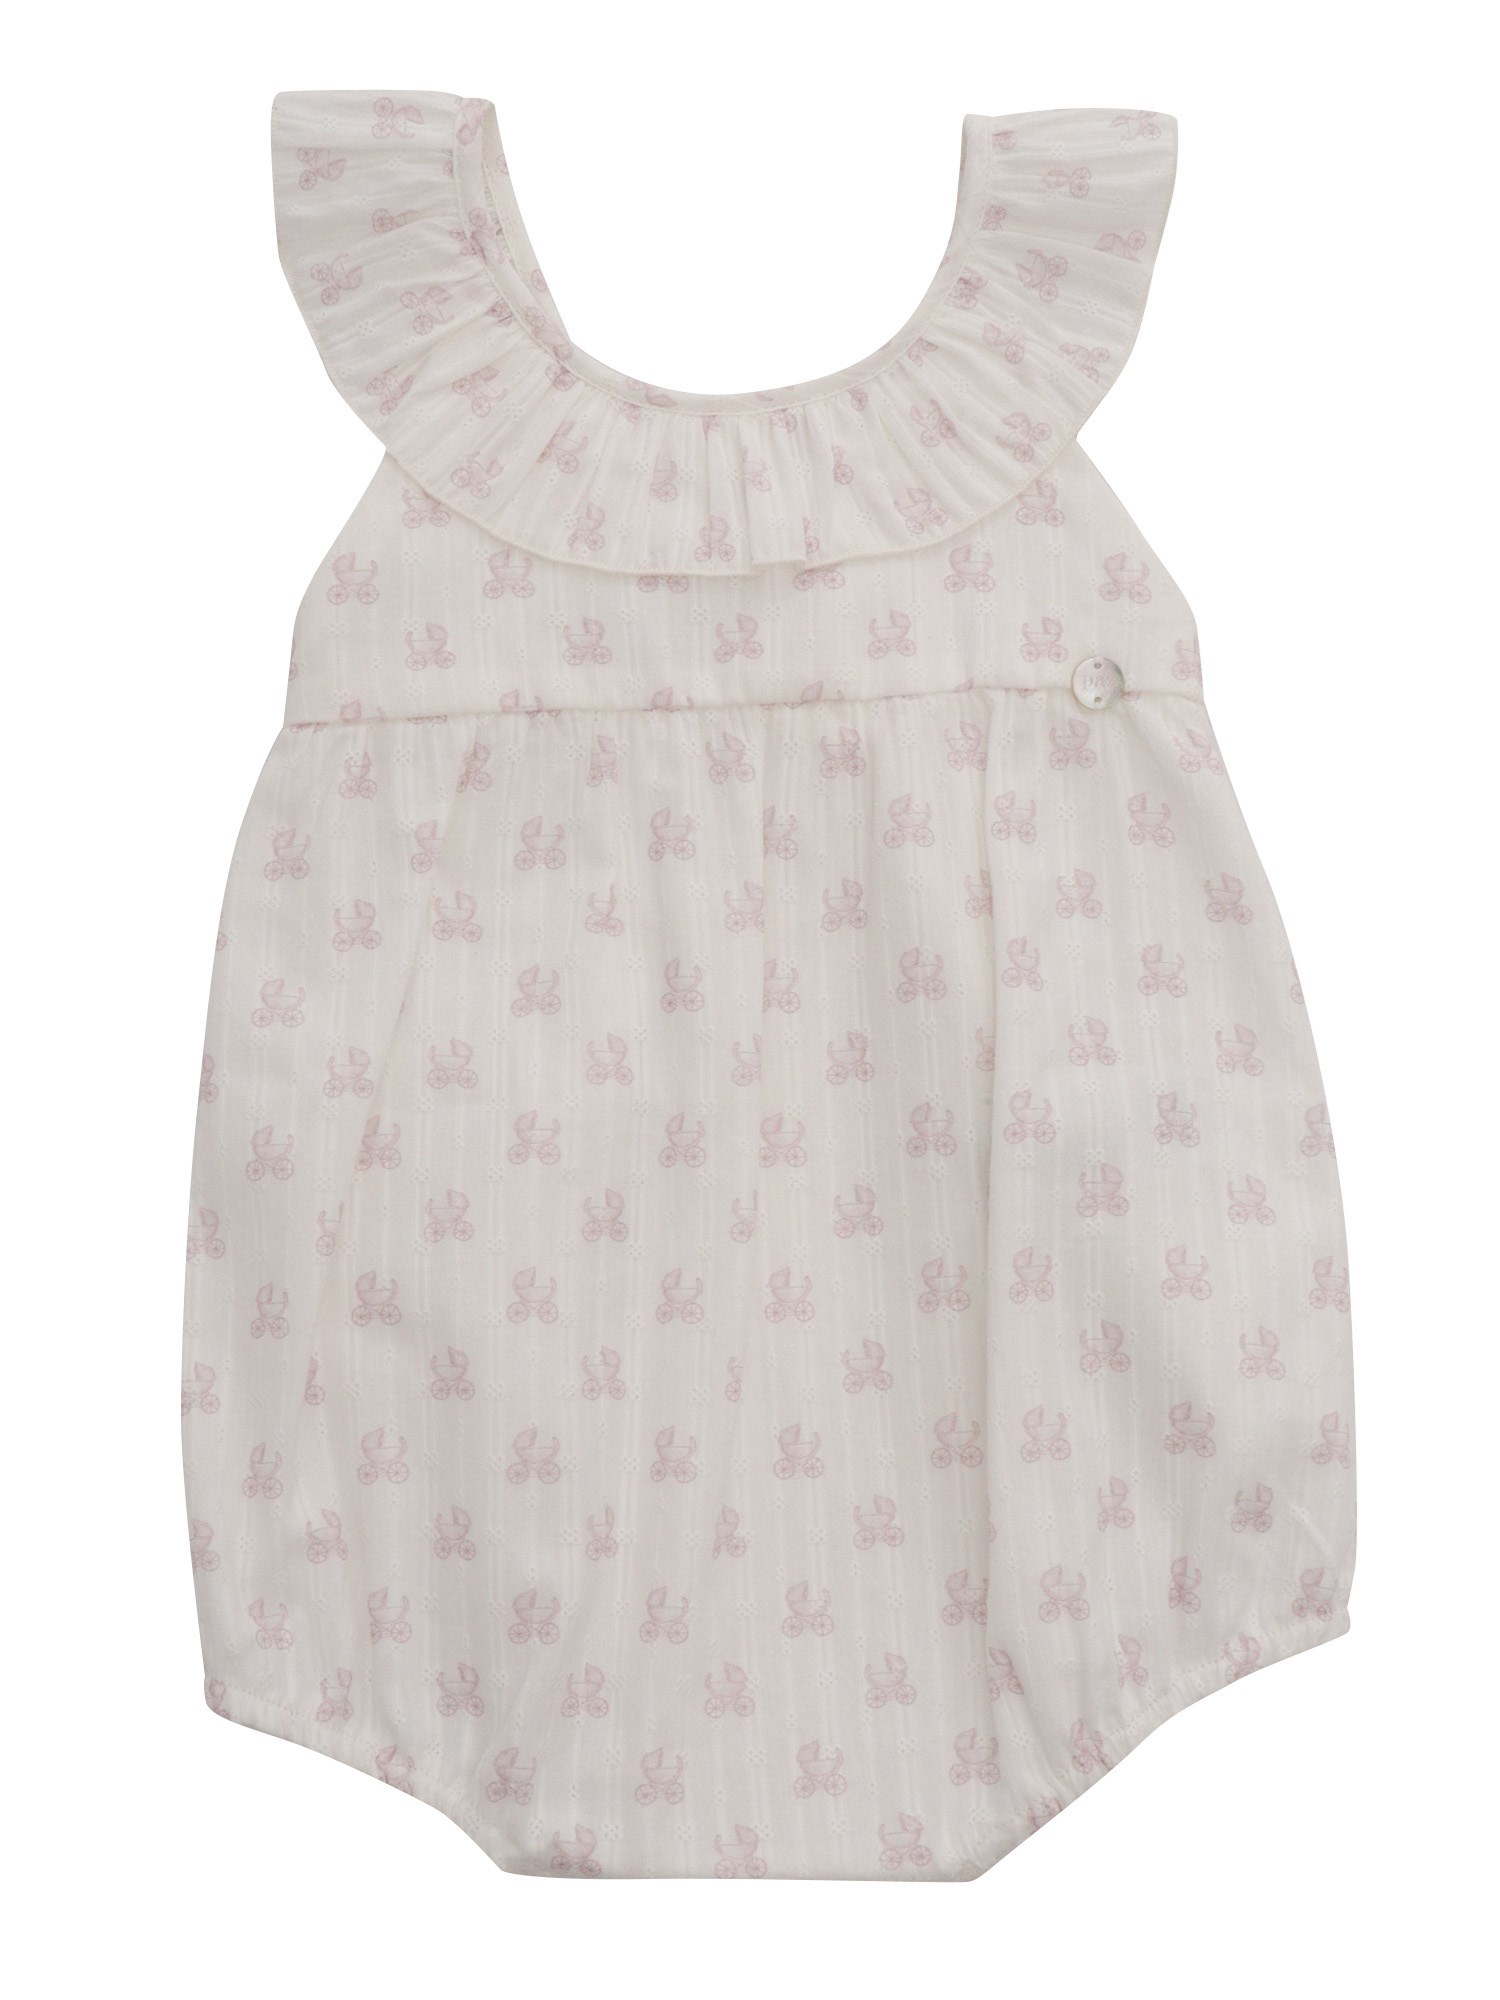 Paz Rodriguez Babies' White Romper With Prints